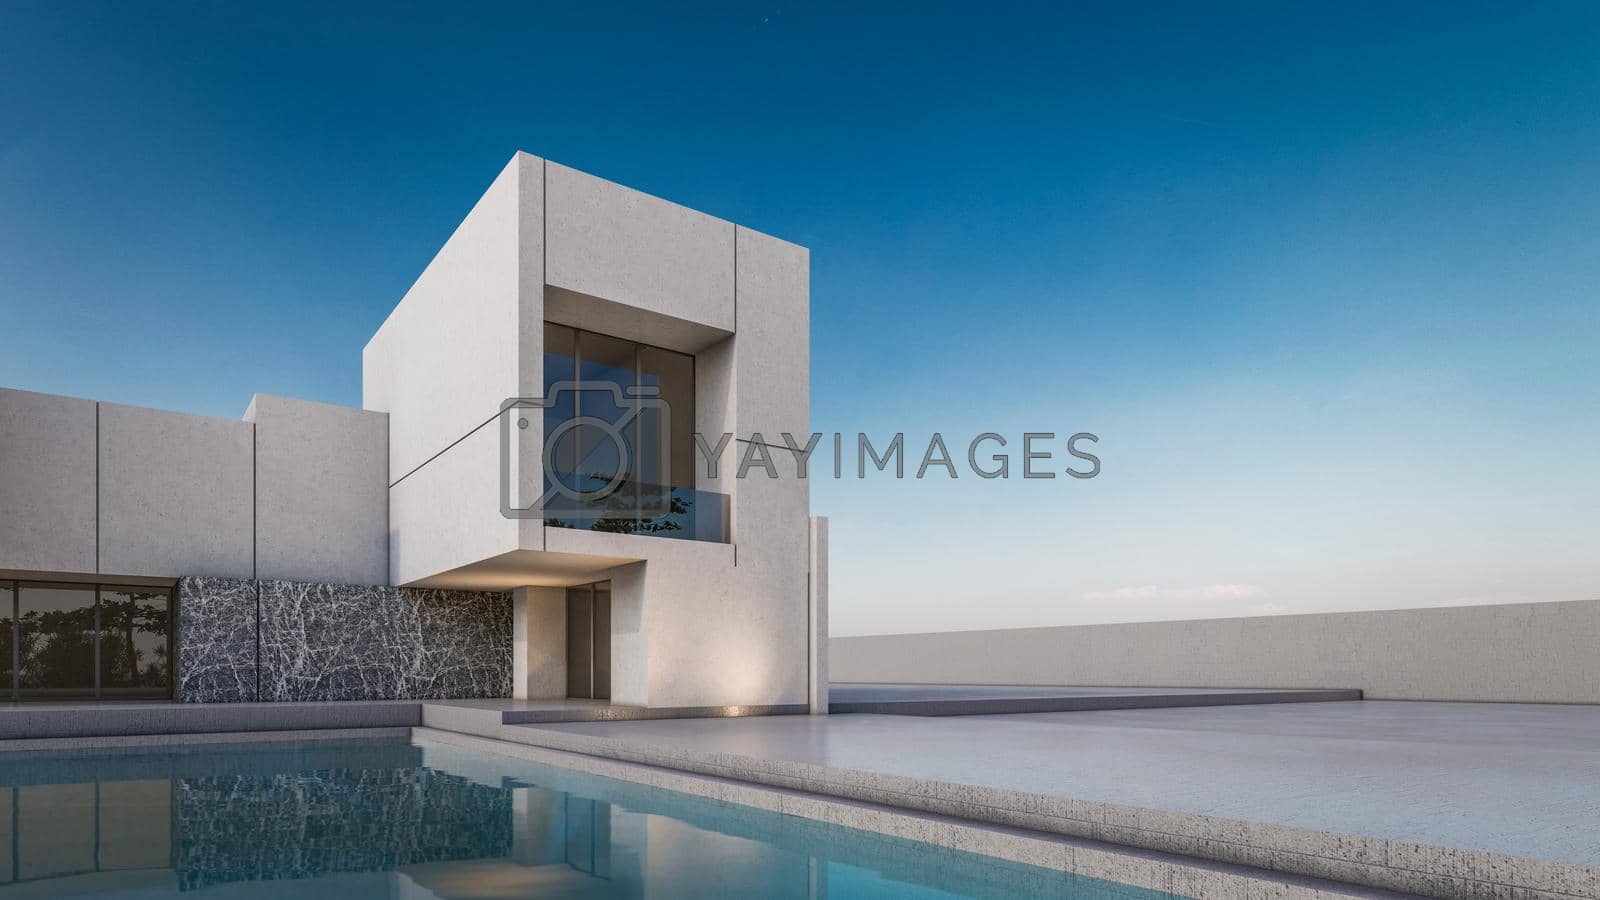 Royalty free image of 3D rendering illustration of modern house with swimming pool by Arissuu1